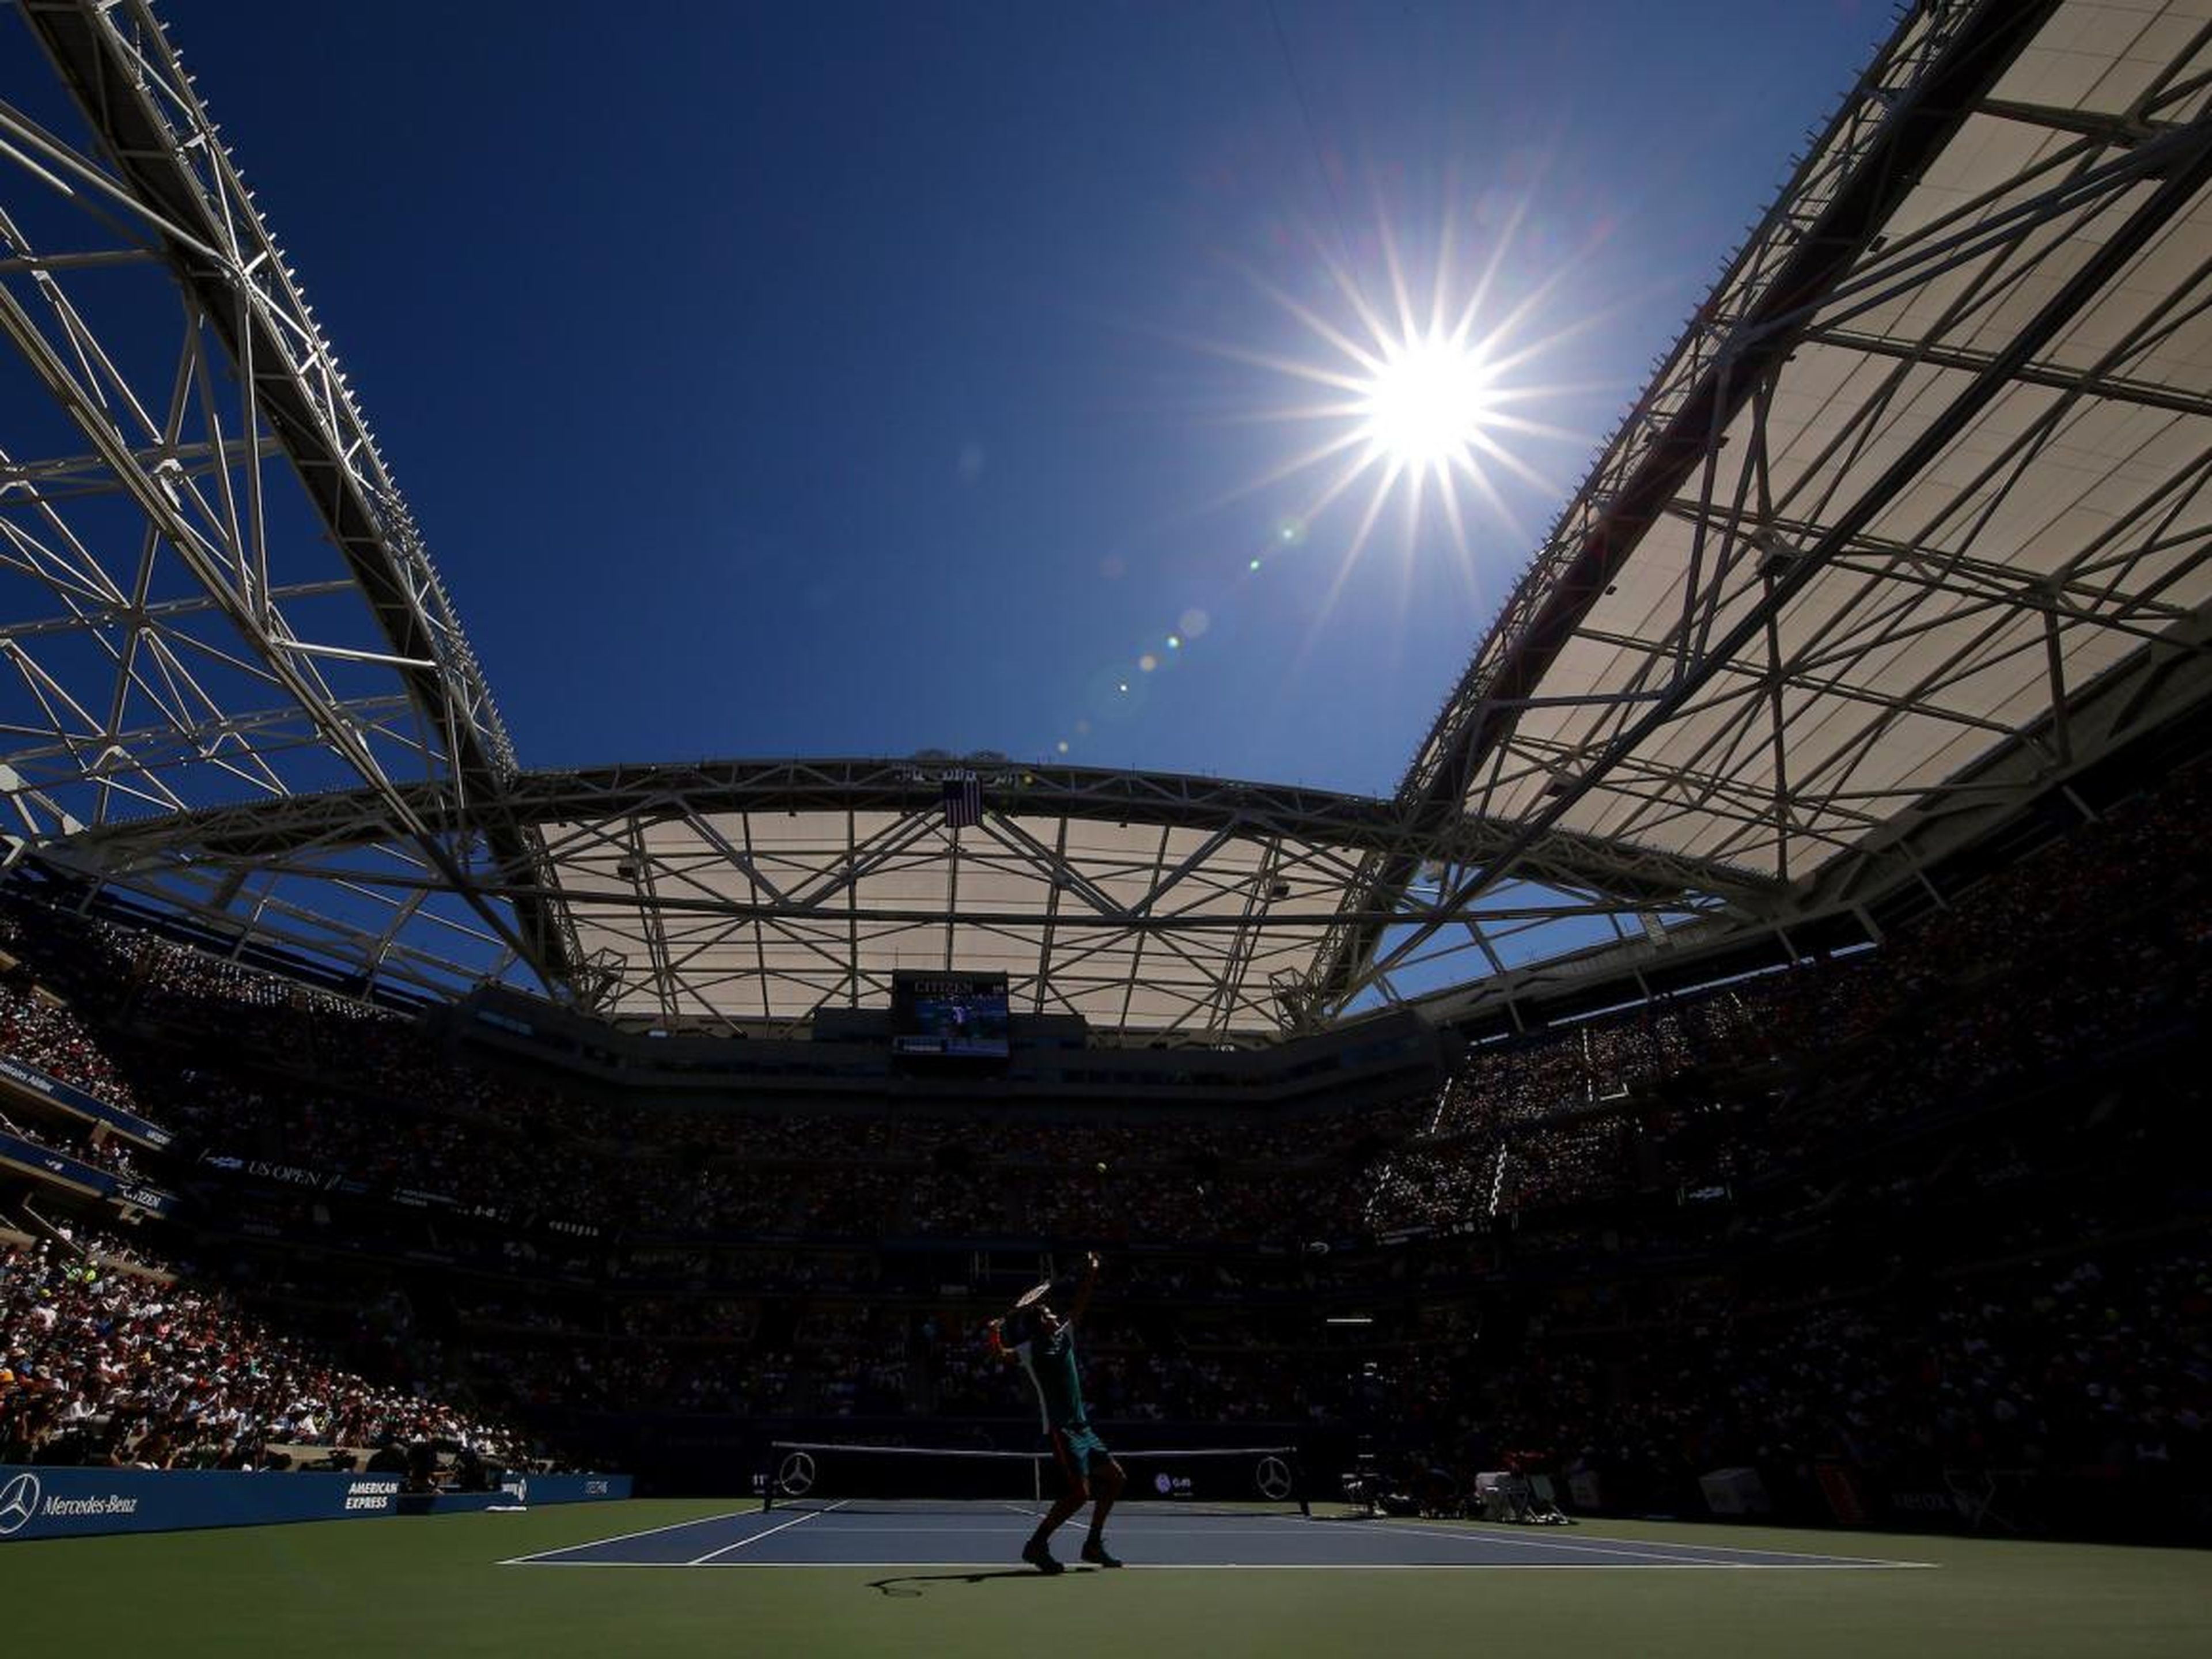 The sun beat down on Federer at the 2015 U.S. Open.